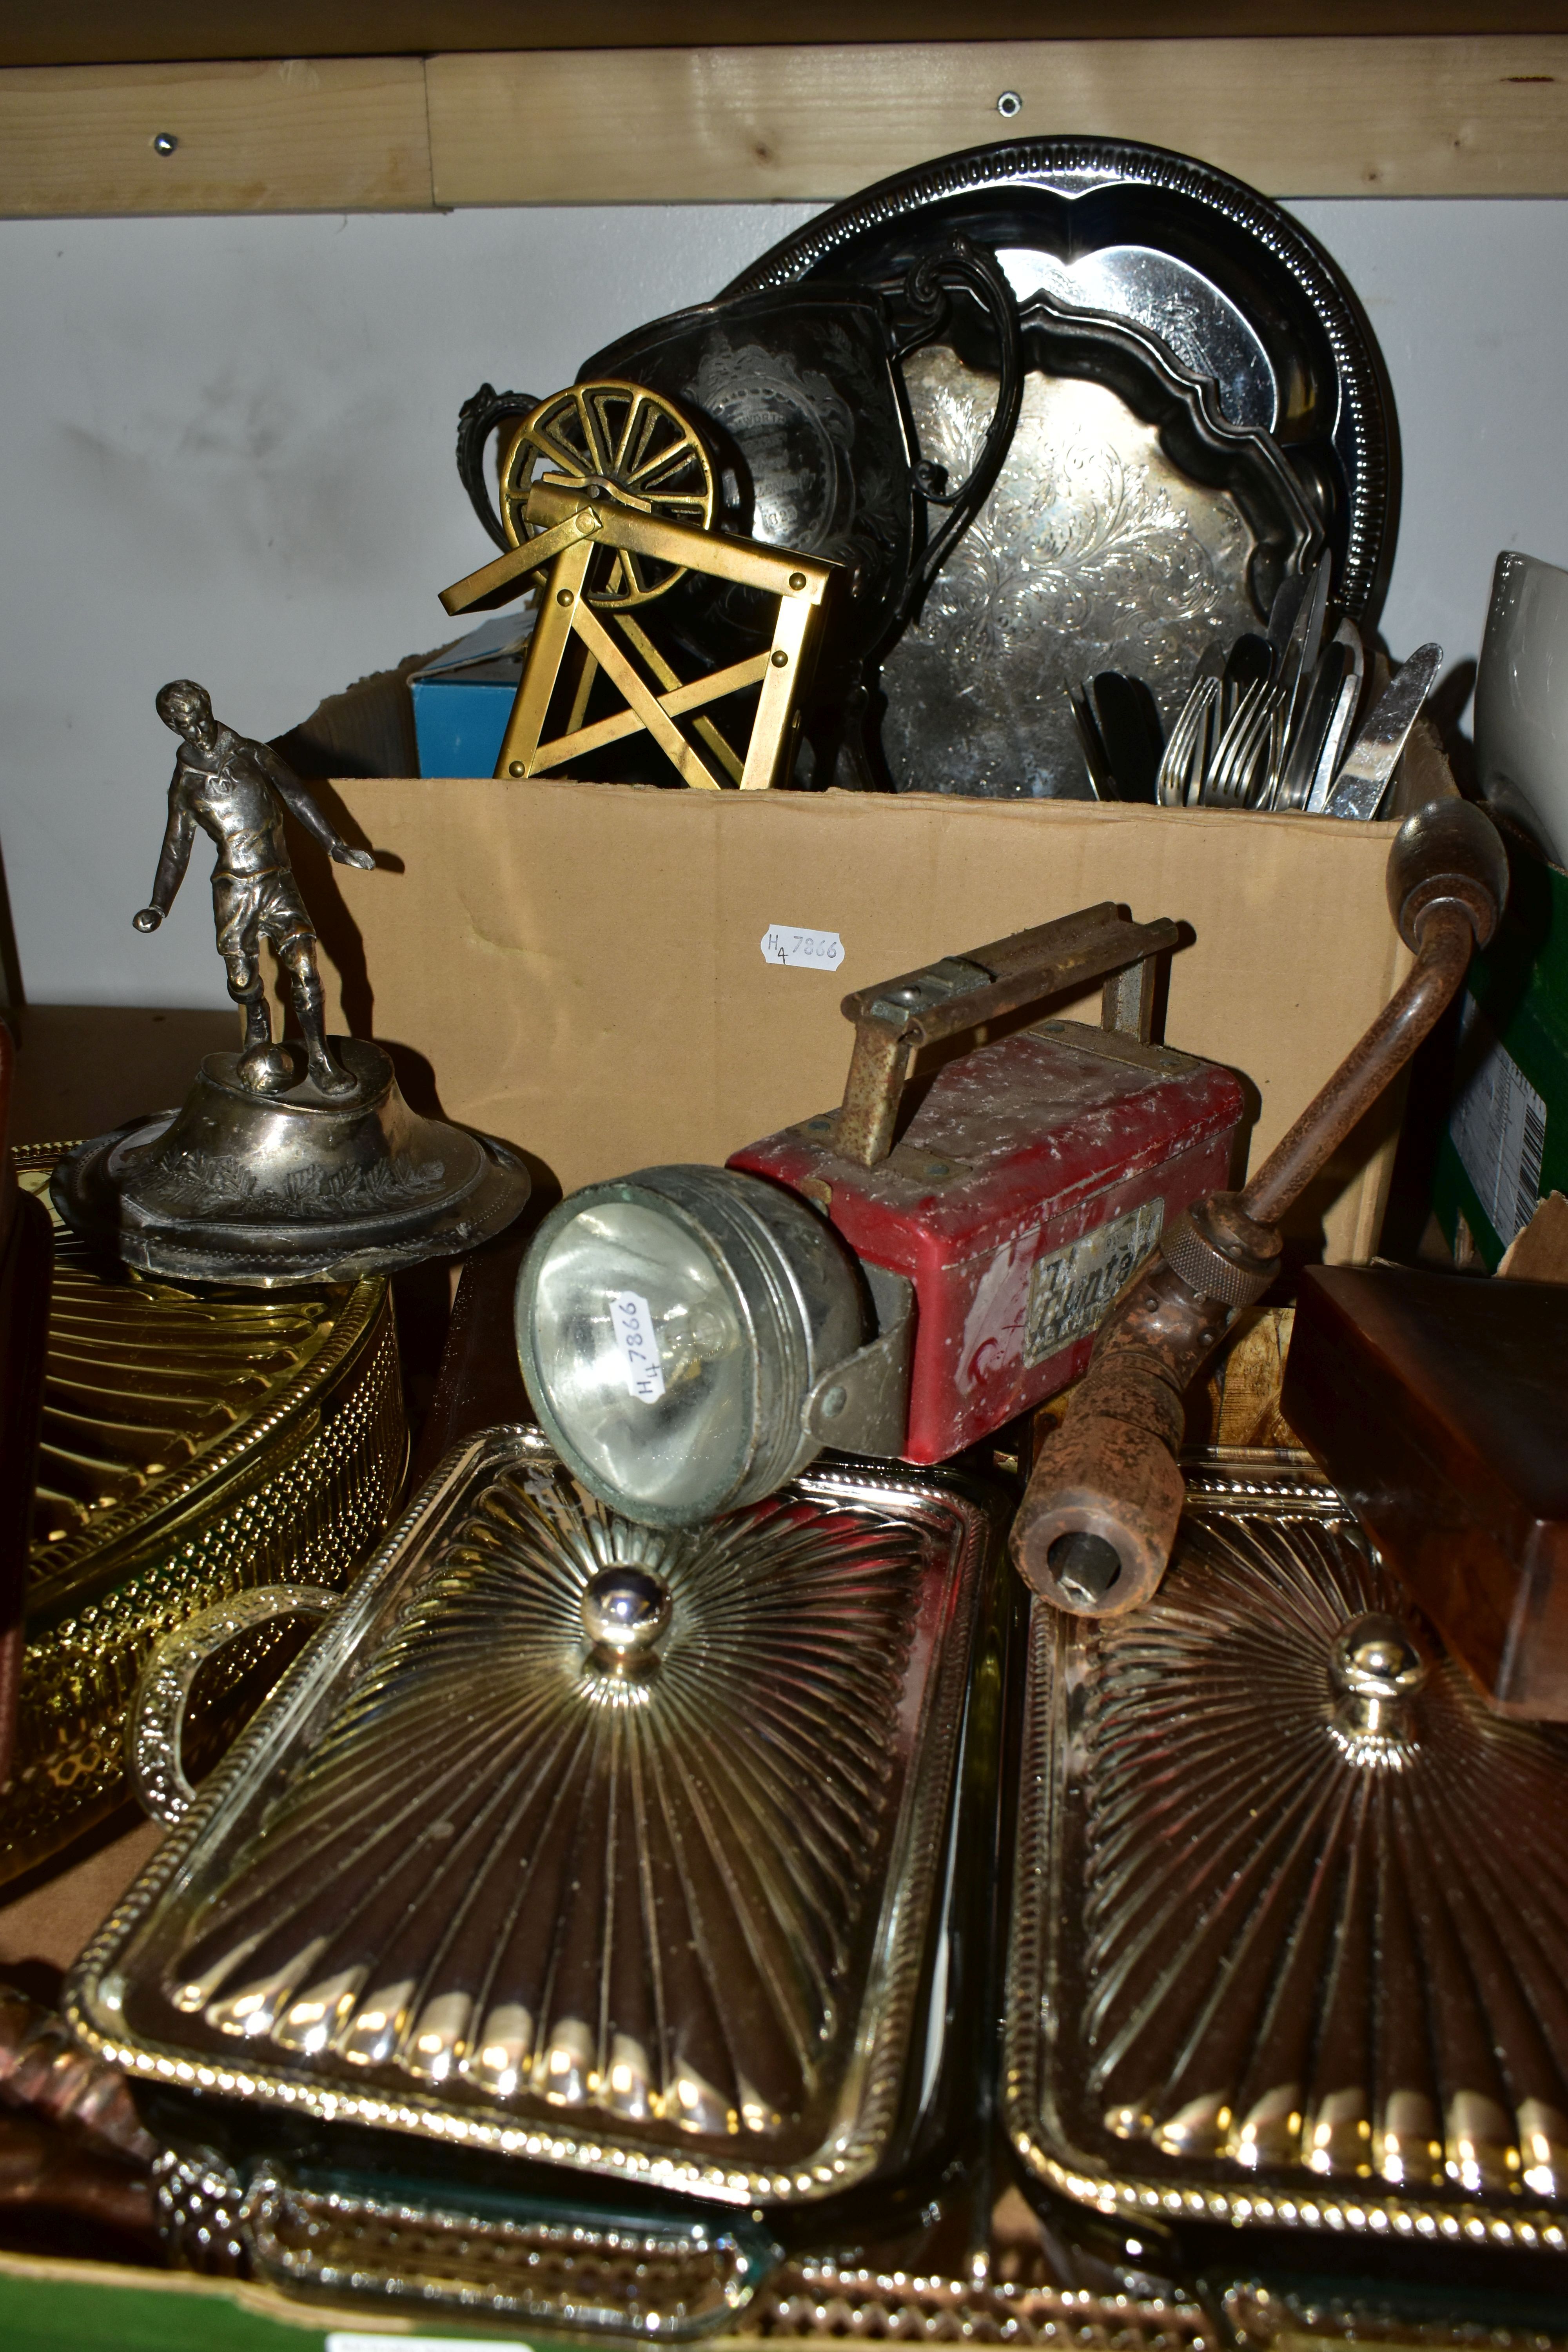 TWO BOXES OF METALWARE, to include two Fire-King serving dishes with lids, a leather box of - Image 4 of 4